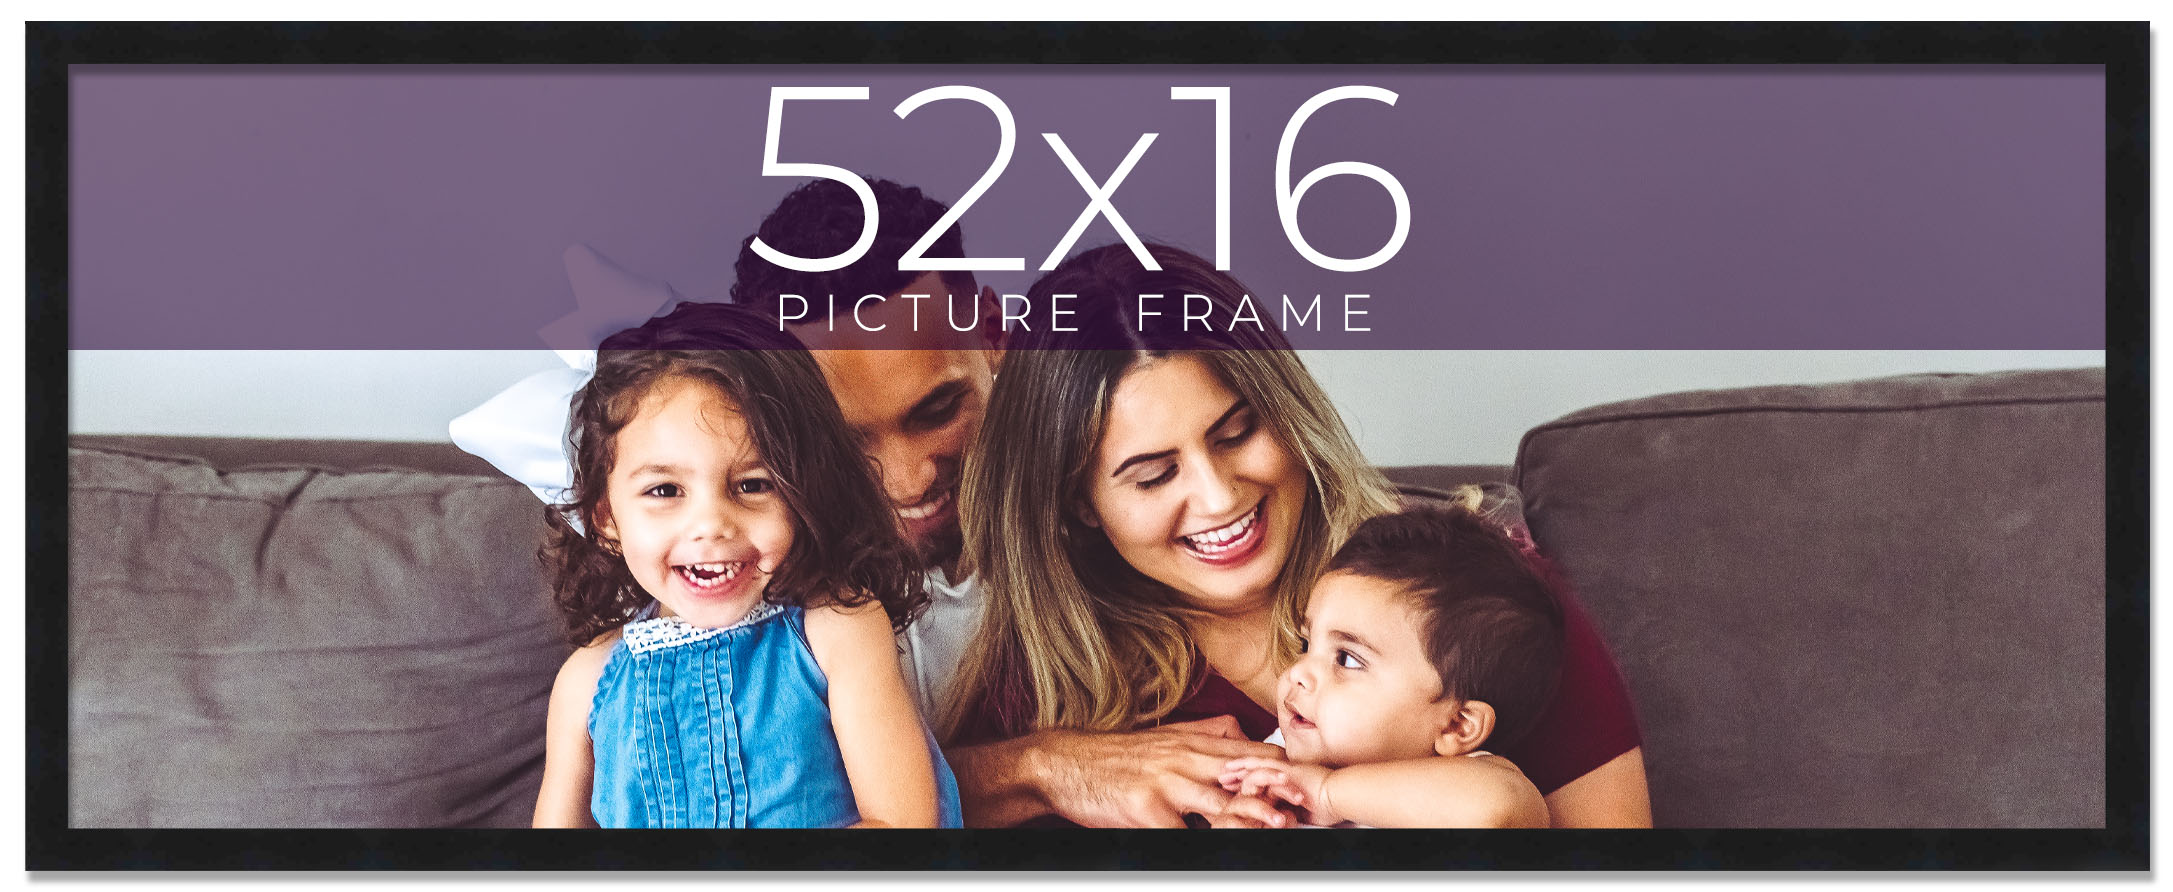 CustomPictureFrames.com 52x16 Black Picture Frame - Wood Picture Frame Complete with UV Acrylic, Foam Board Backing & Hanging Hardware